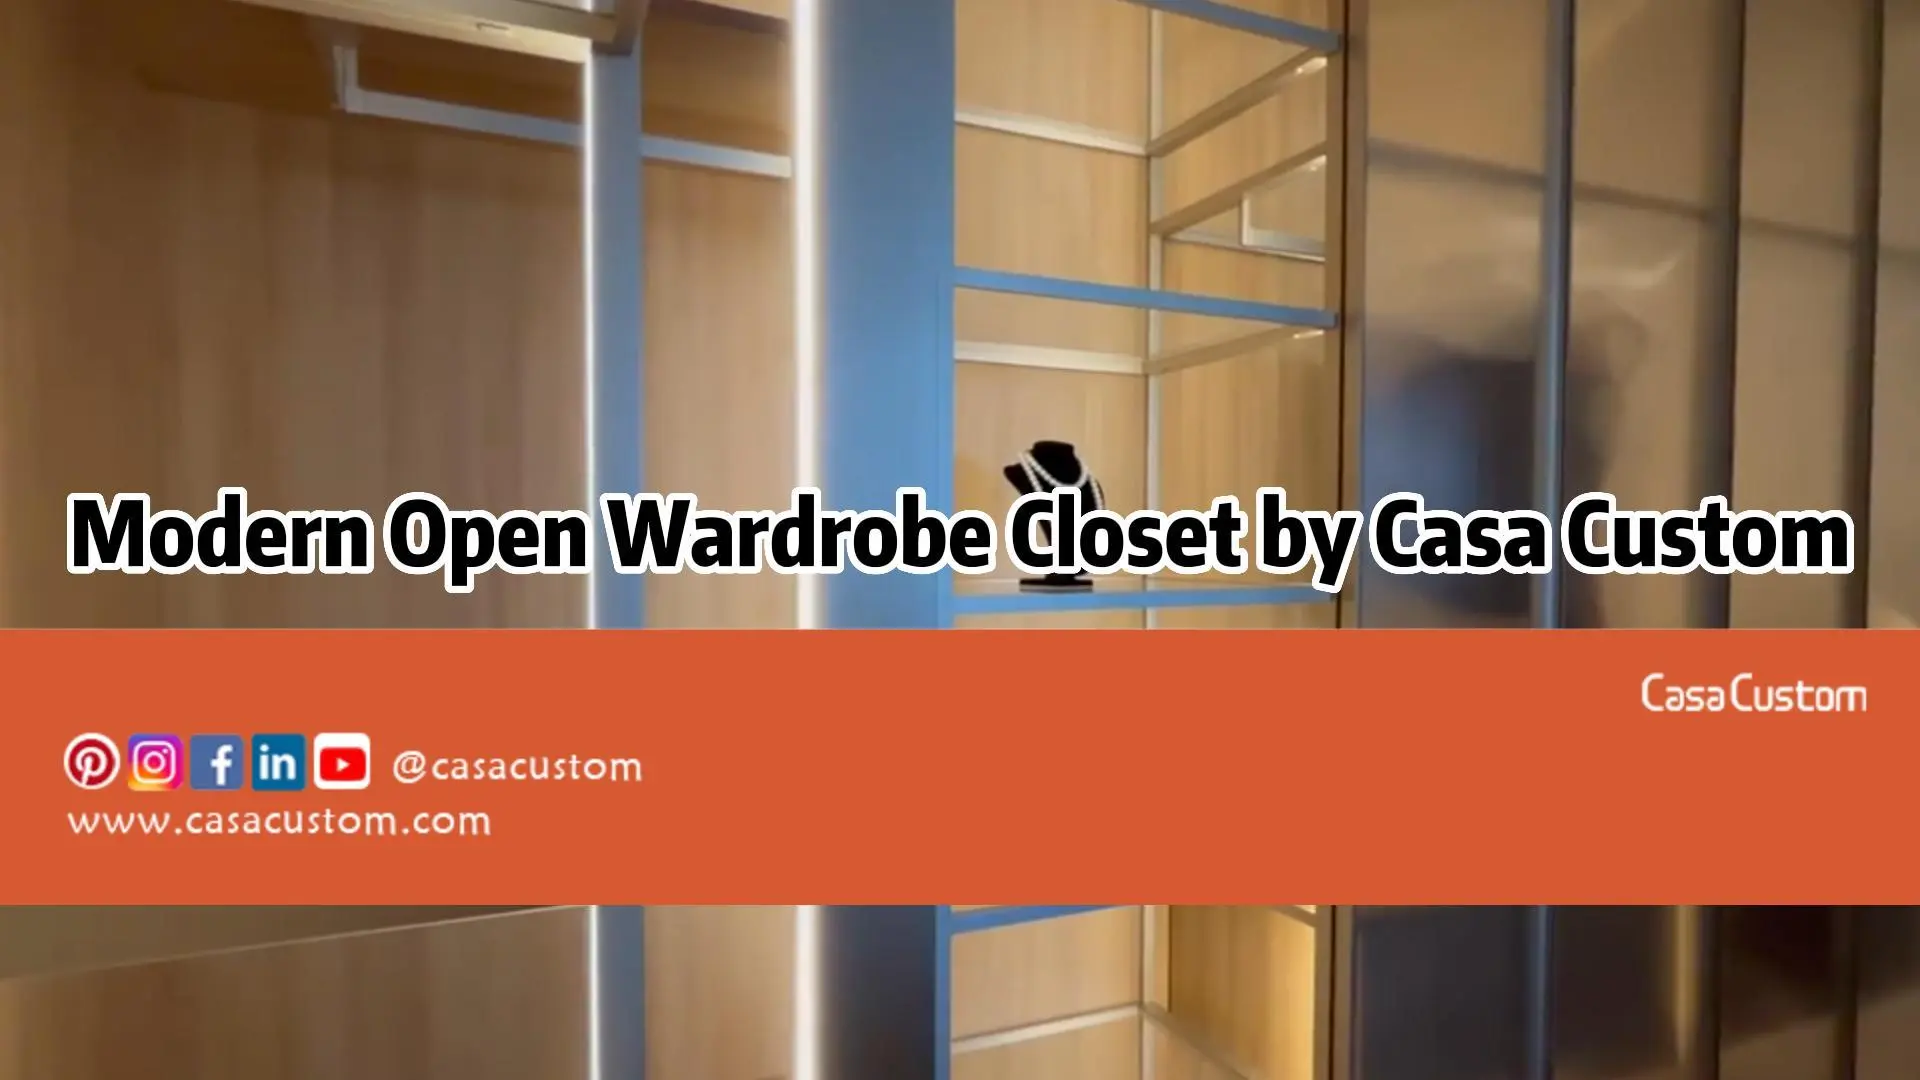 This modern open wardrobe closet by Casa Custom is the perfect solution for storage and organization. It features a sleek metal structure, frosted glass doors, and glass partition panels for a contemporary and stylish look.